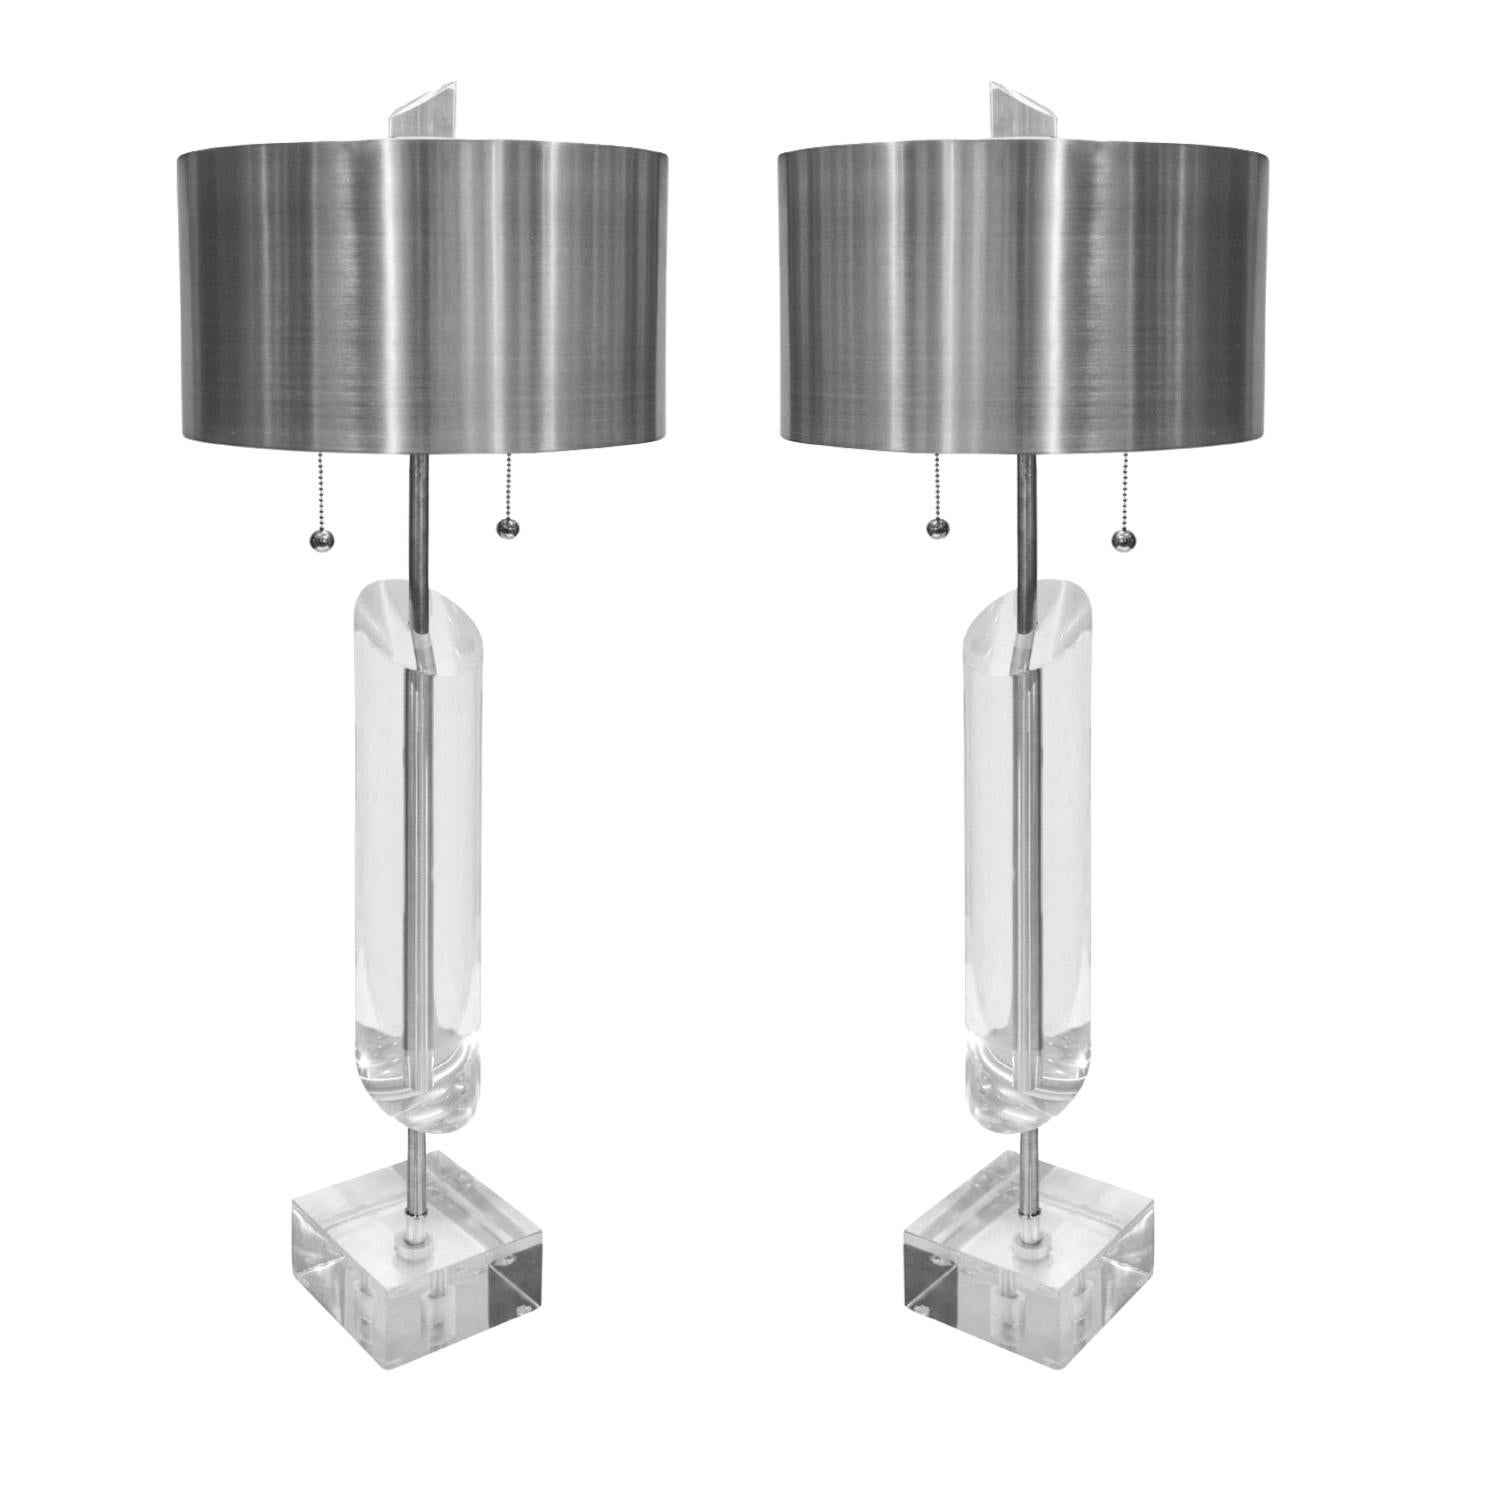 Pair of large artisan sculptural table lamps in solid Lucite with hand-spun brushed aluminum shades and hardware by Van Teal, American 1970s (signed “Van Teal” on bases). Lamps have been professionally cleaned, polished and rewired with silk cords